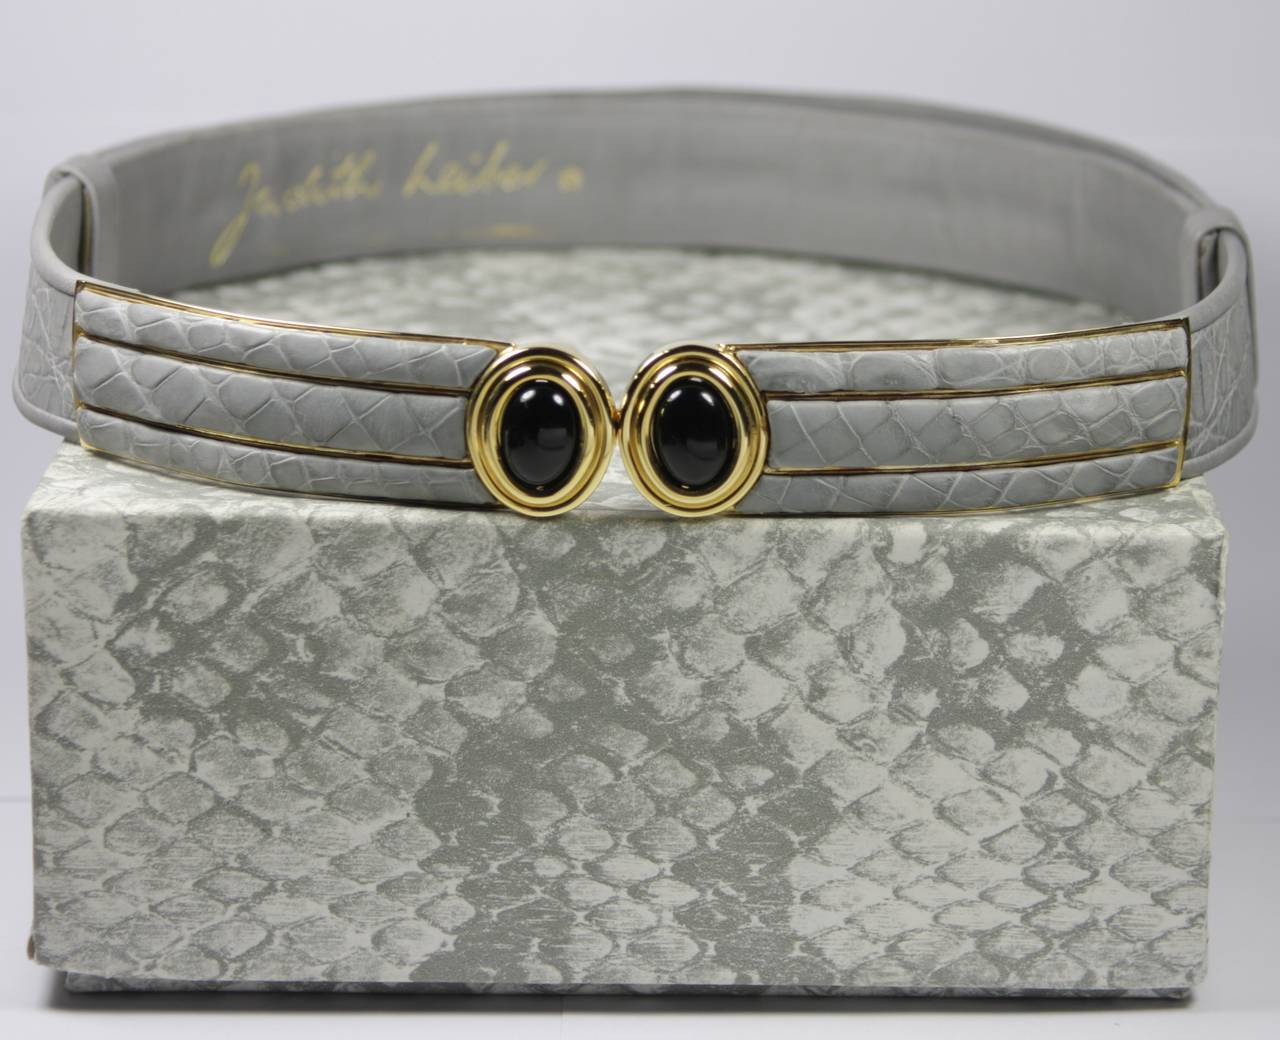 Judith Leiber Grey Snakeskin Belt with Gold Hardware and Black Stone Buckle 4